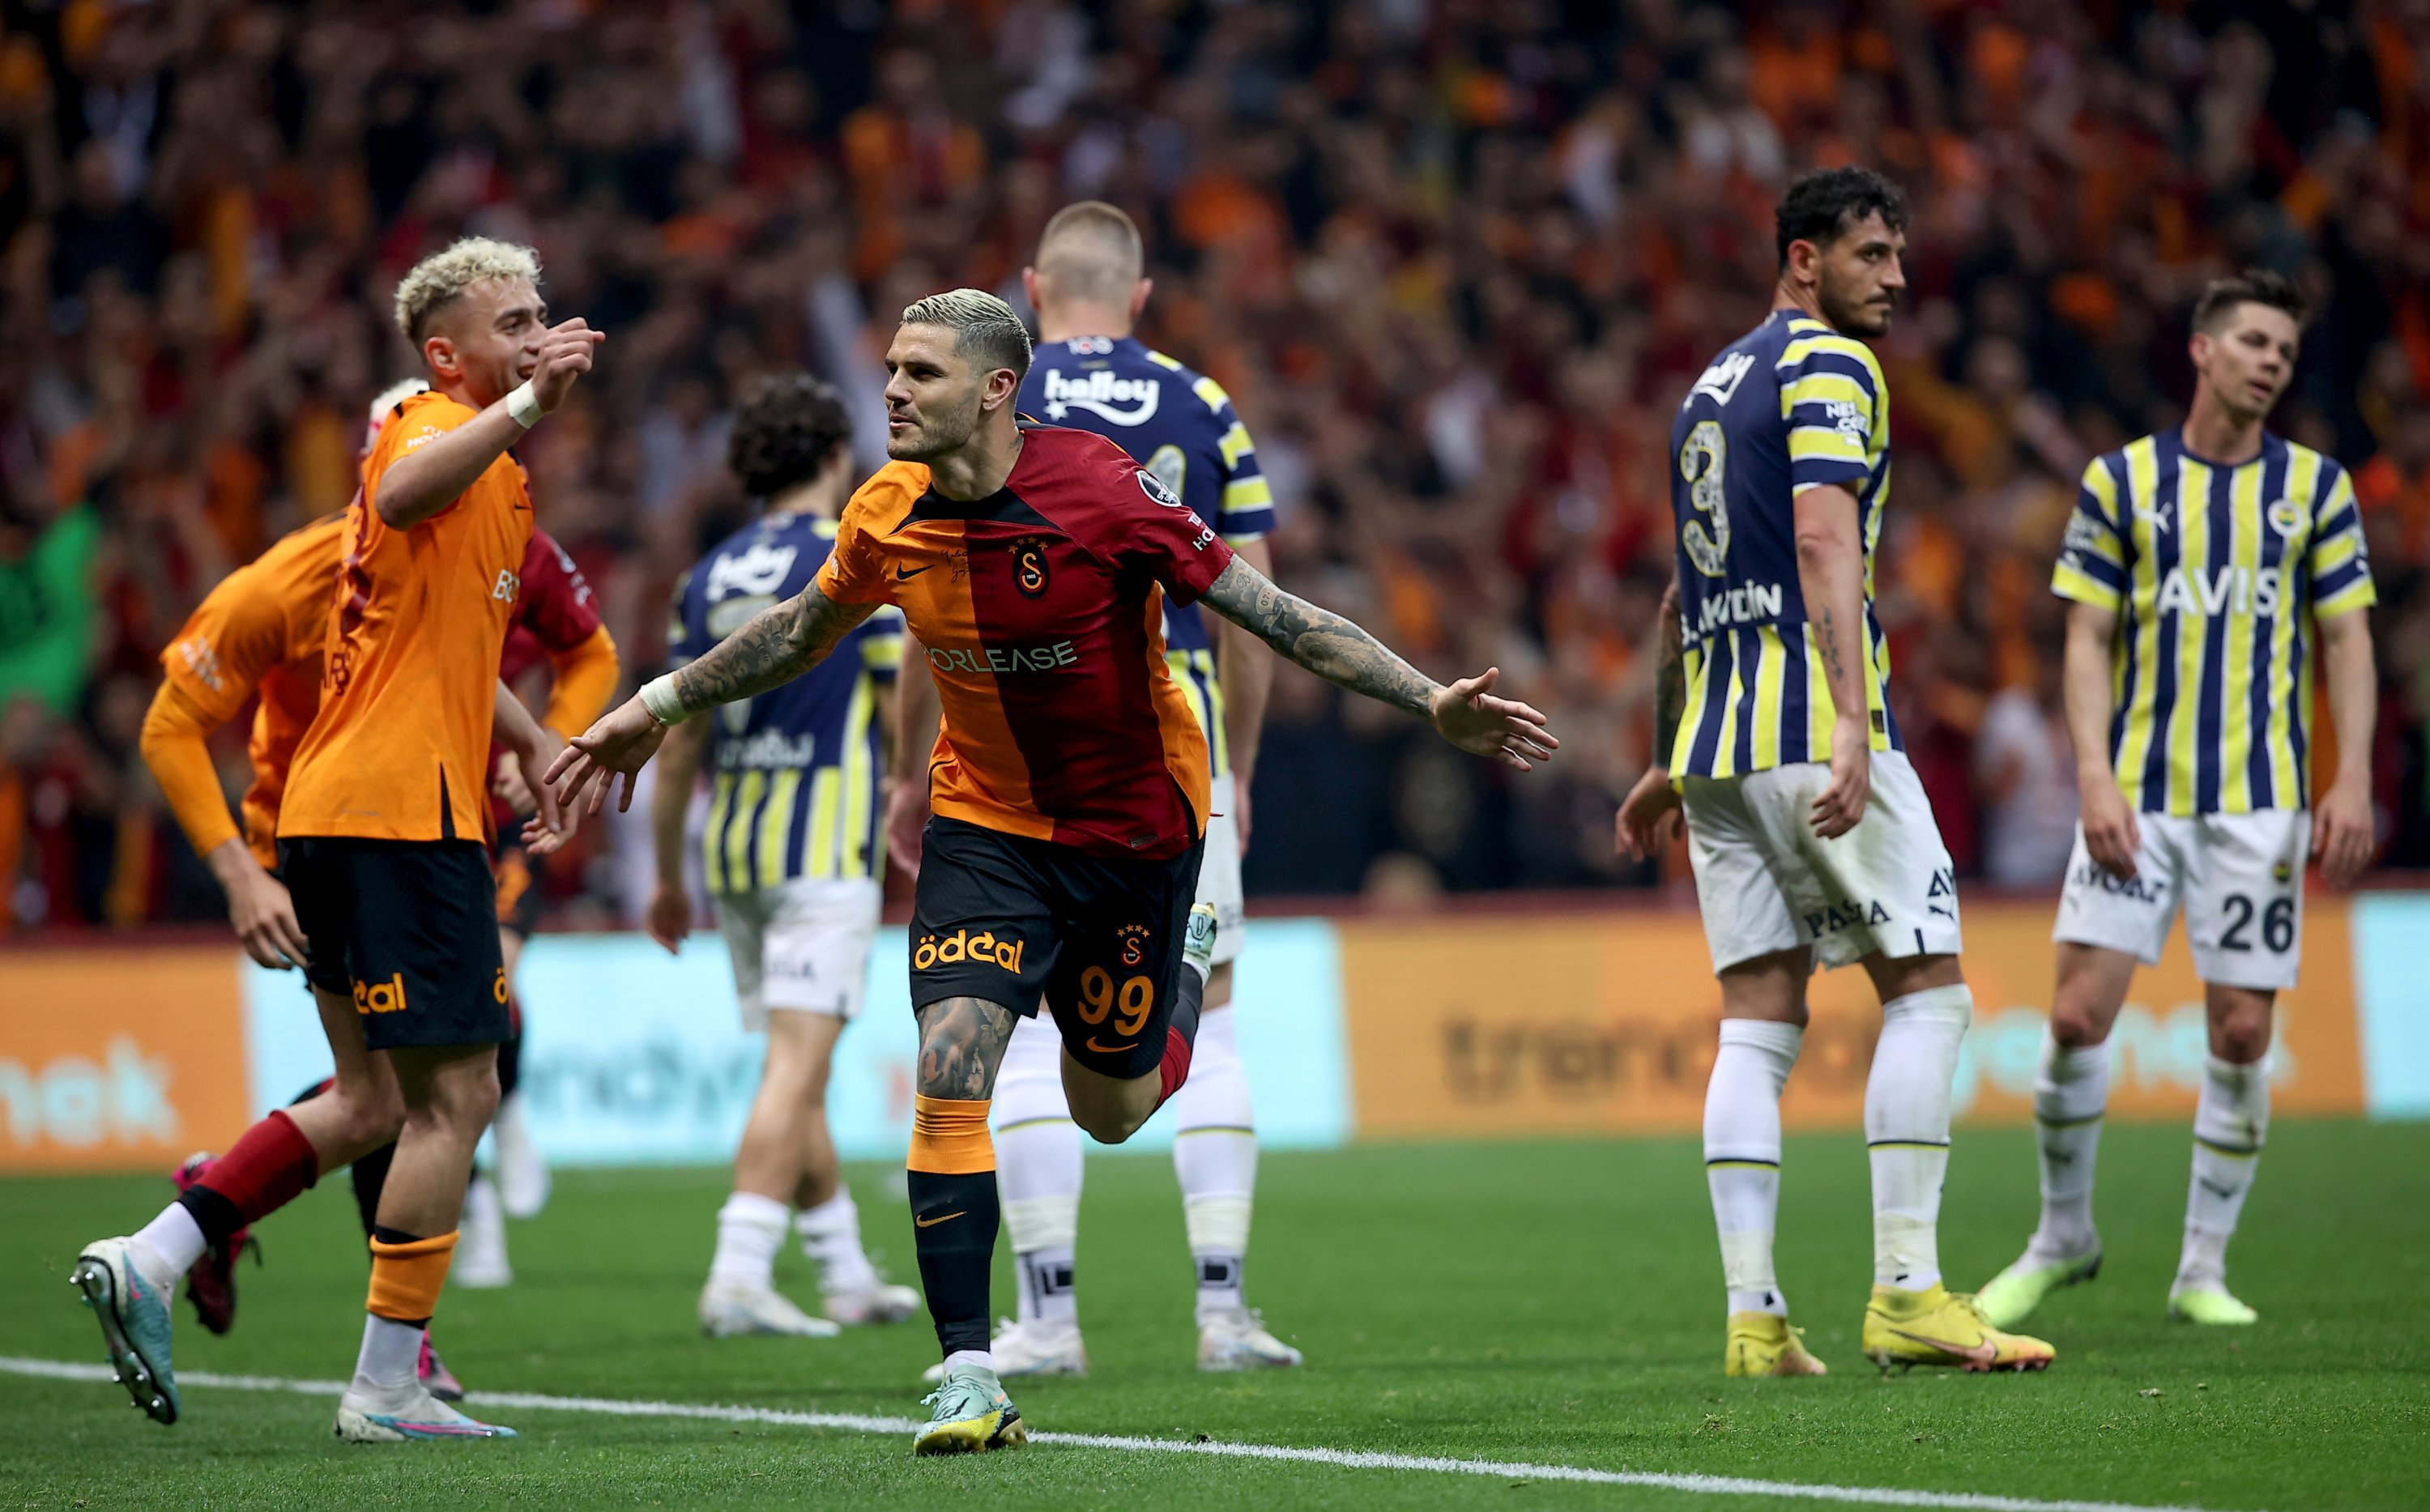 Champions Galatasaray reign supreme over eternal rivals Fenerbahçe